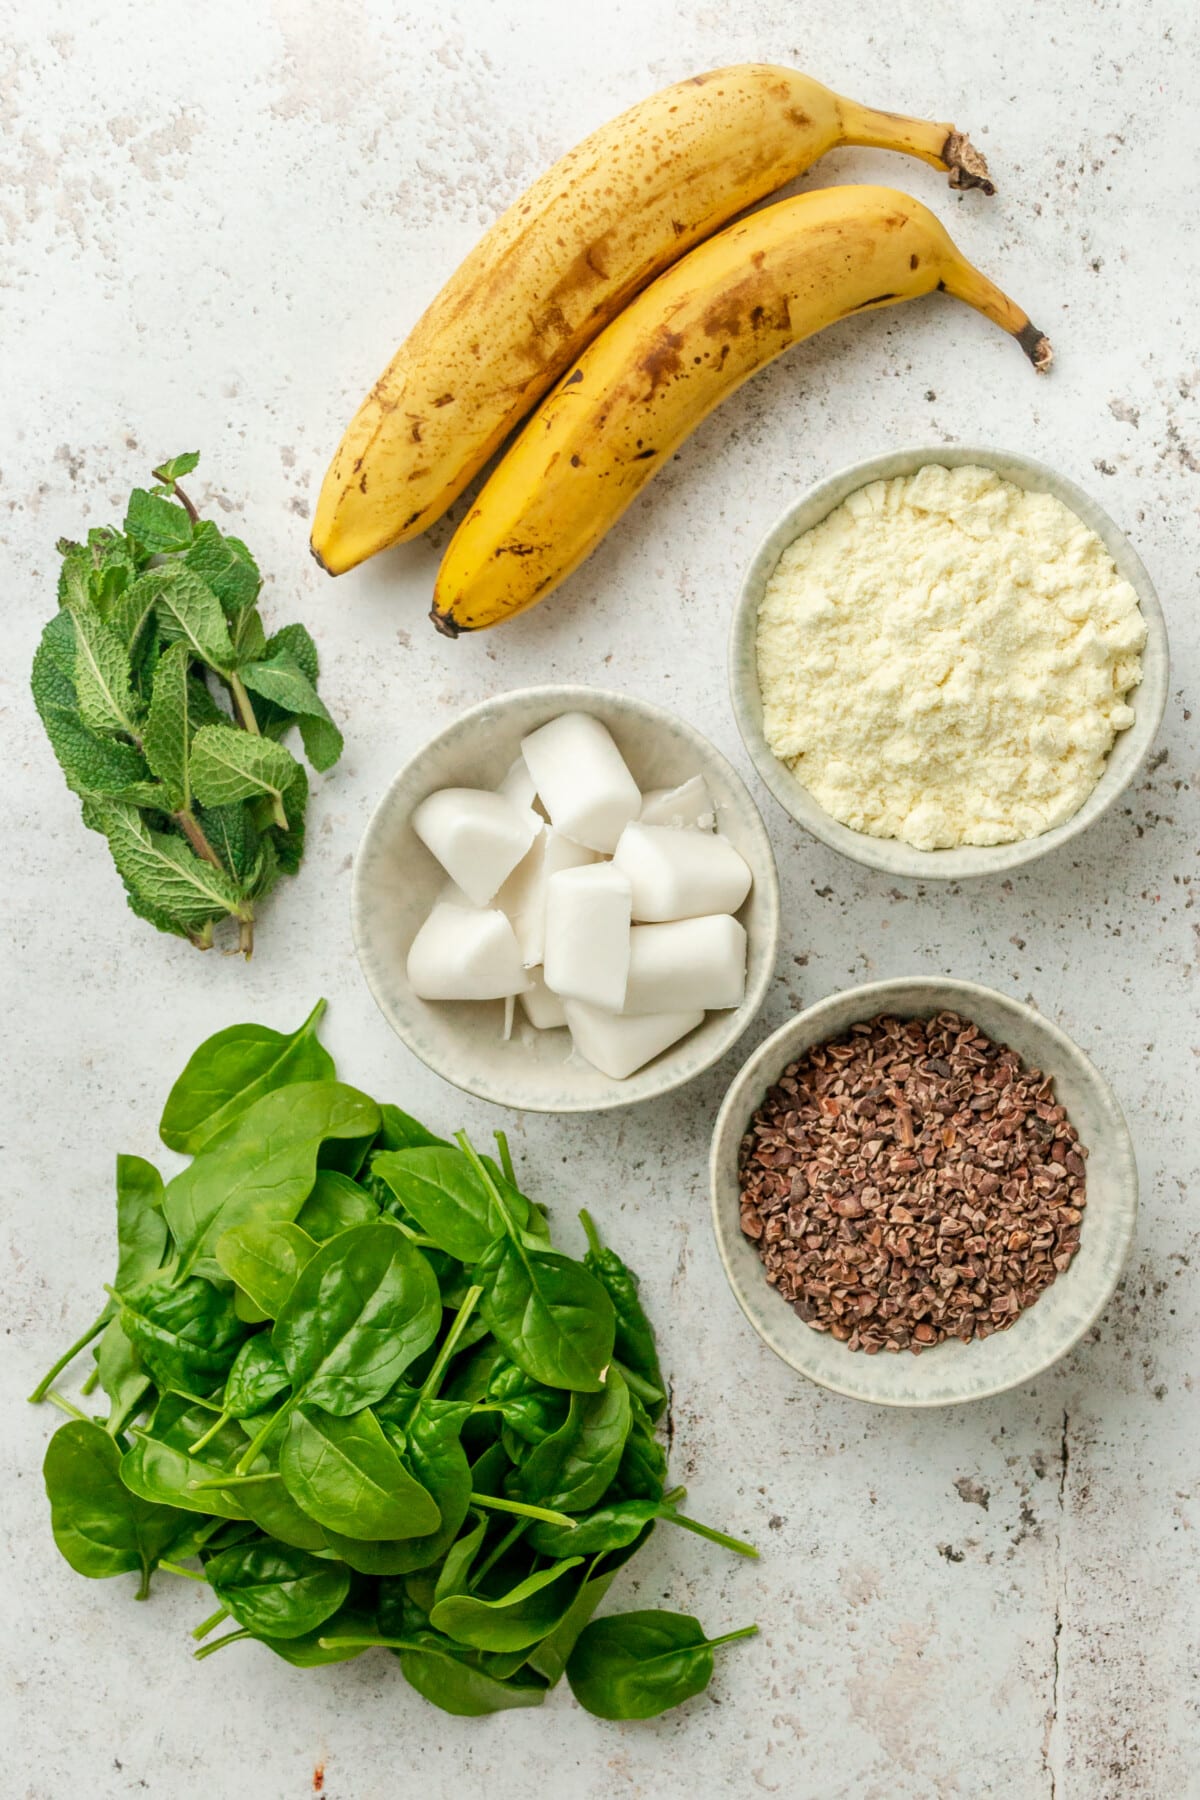 Ingredients for mint chocolate chip green smoothies are laid out in a variety of small plates on a light grey colored surface.